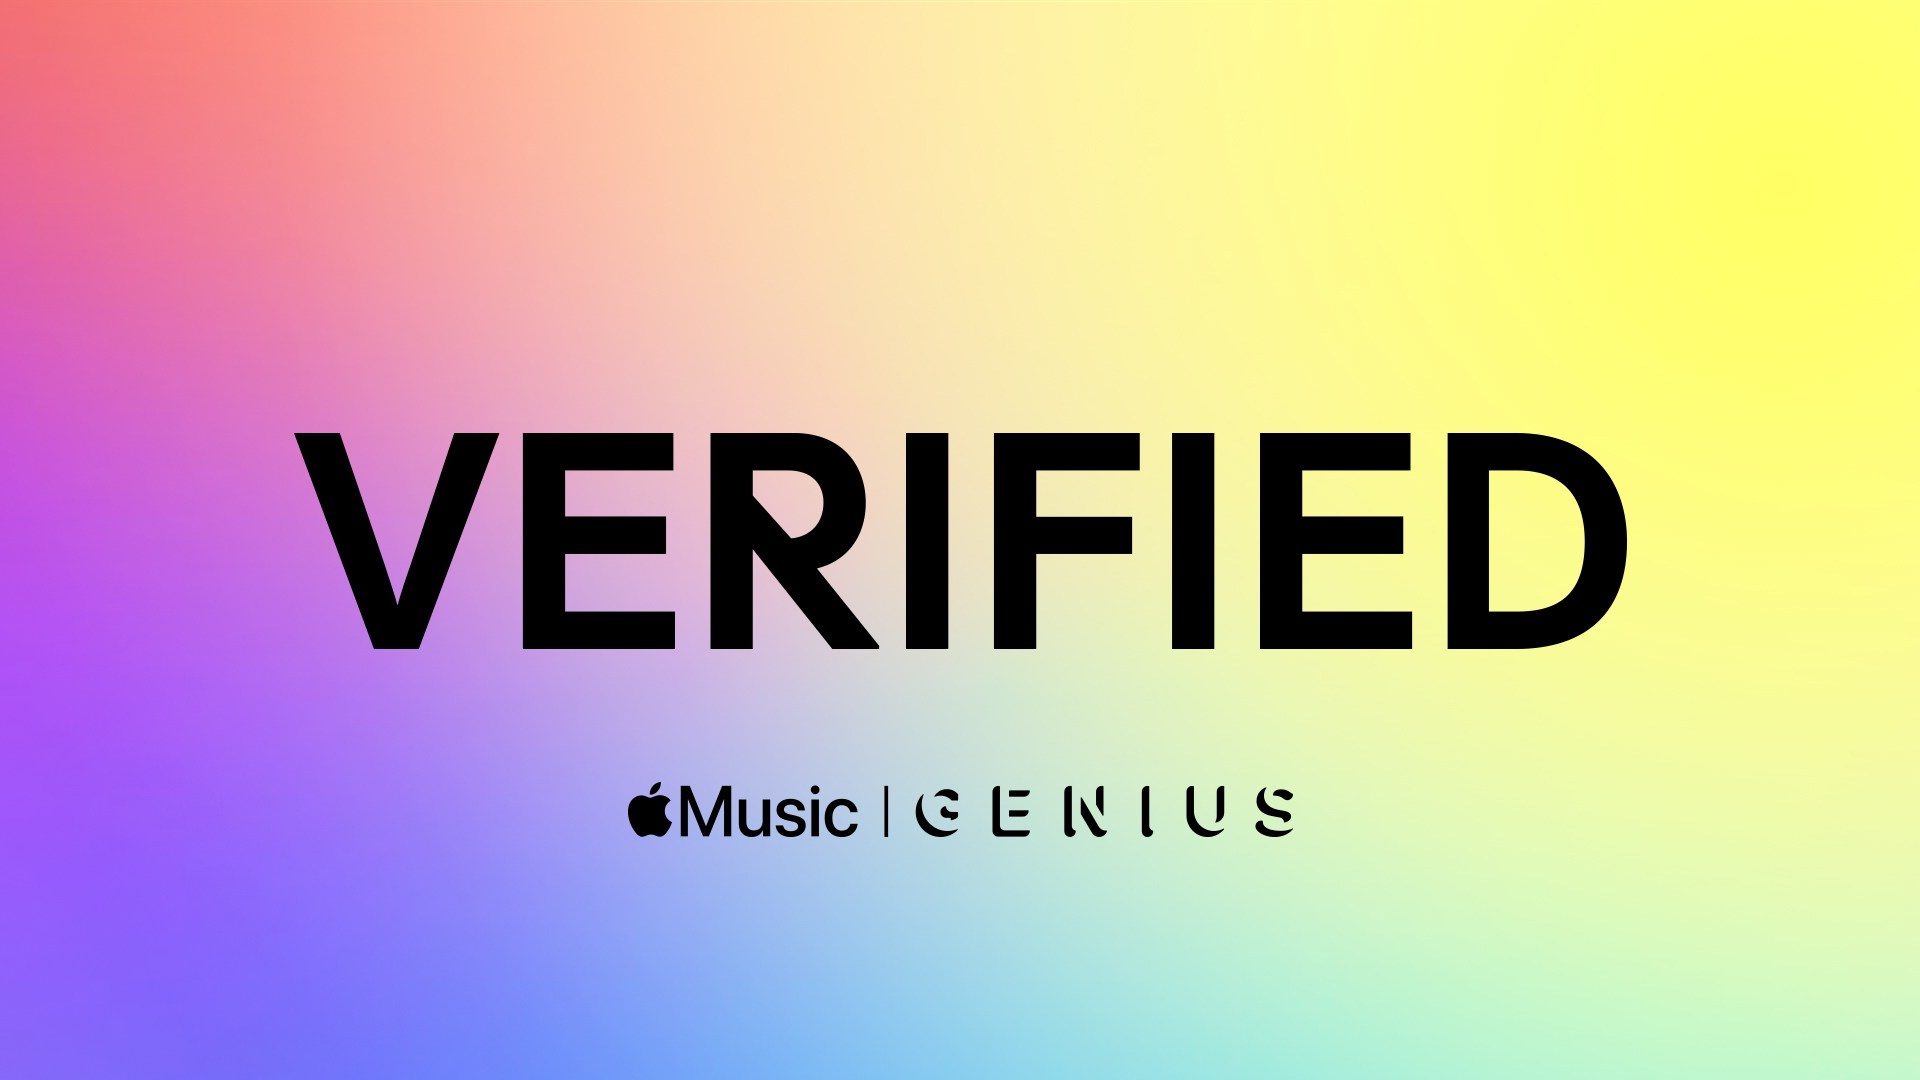 Apple inks deal with 'Verified' creators for Apple Music